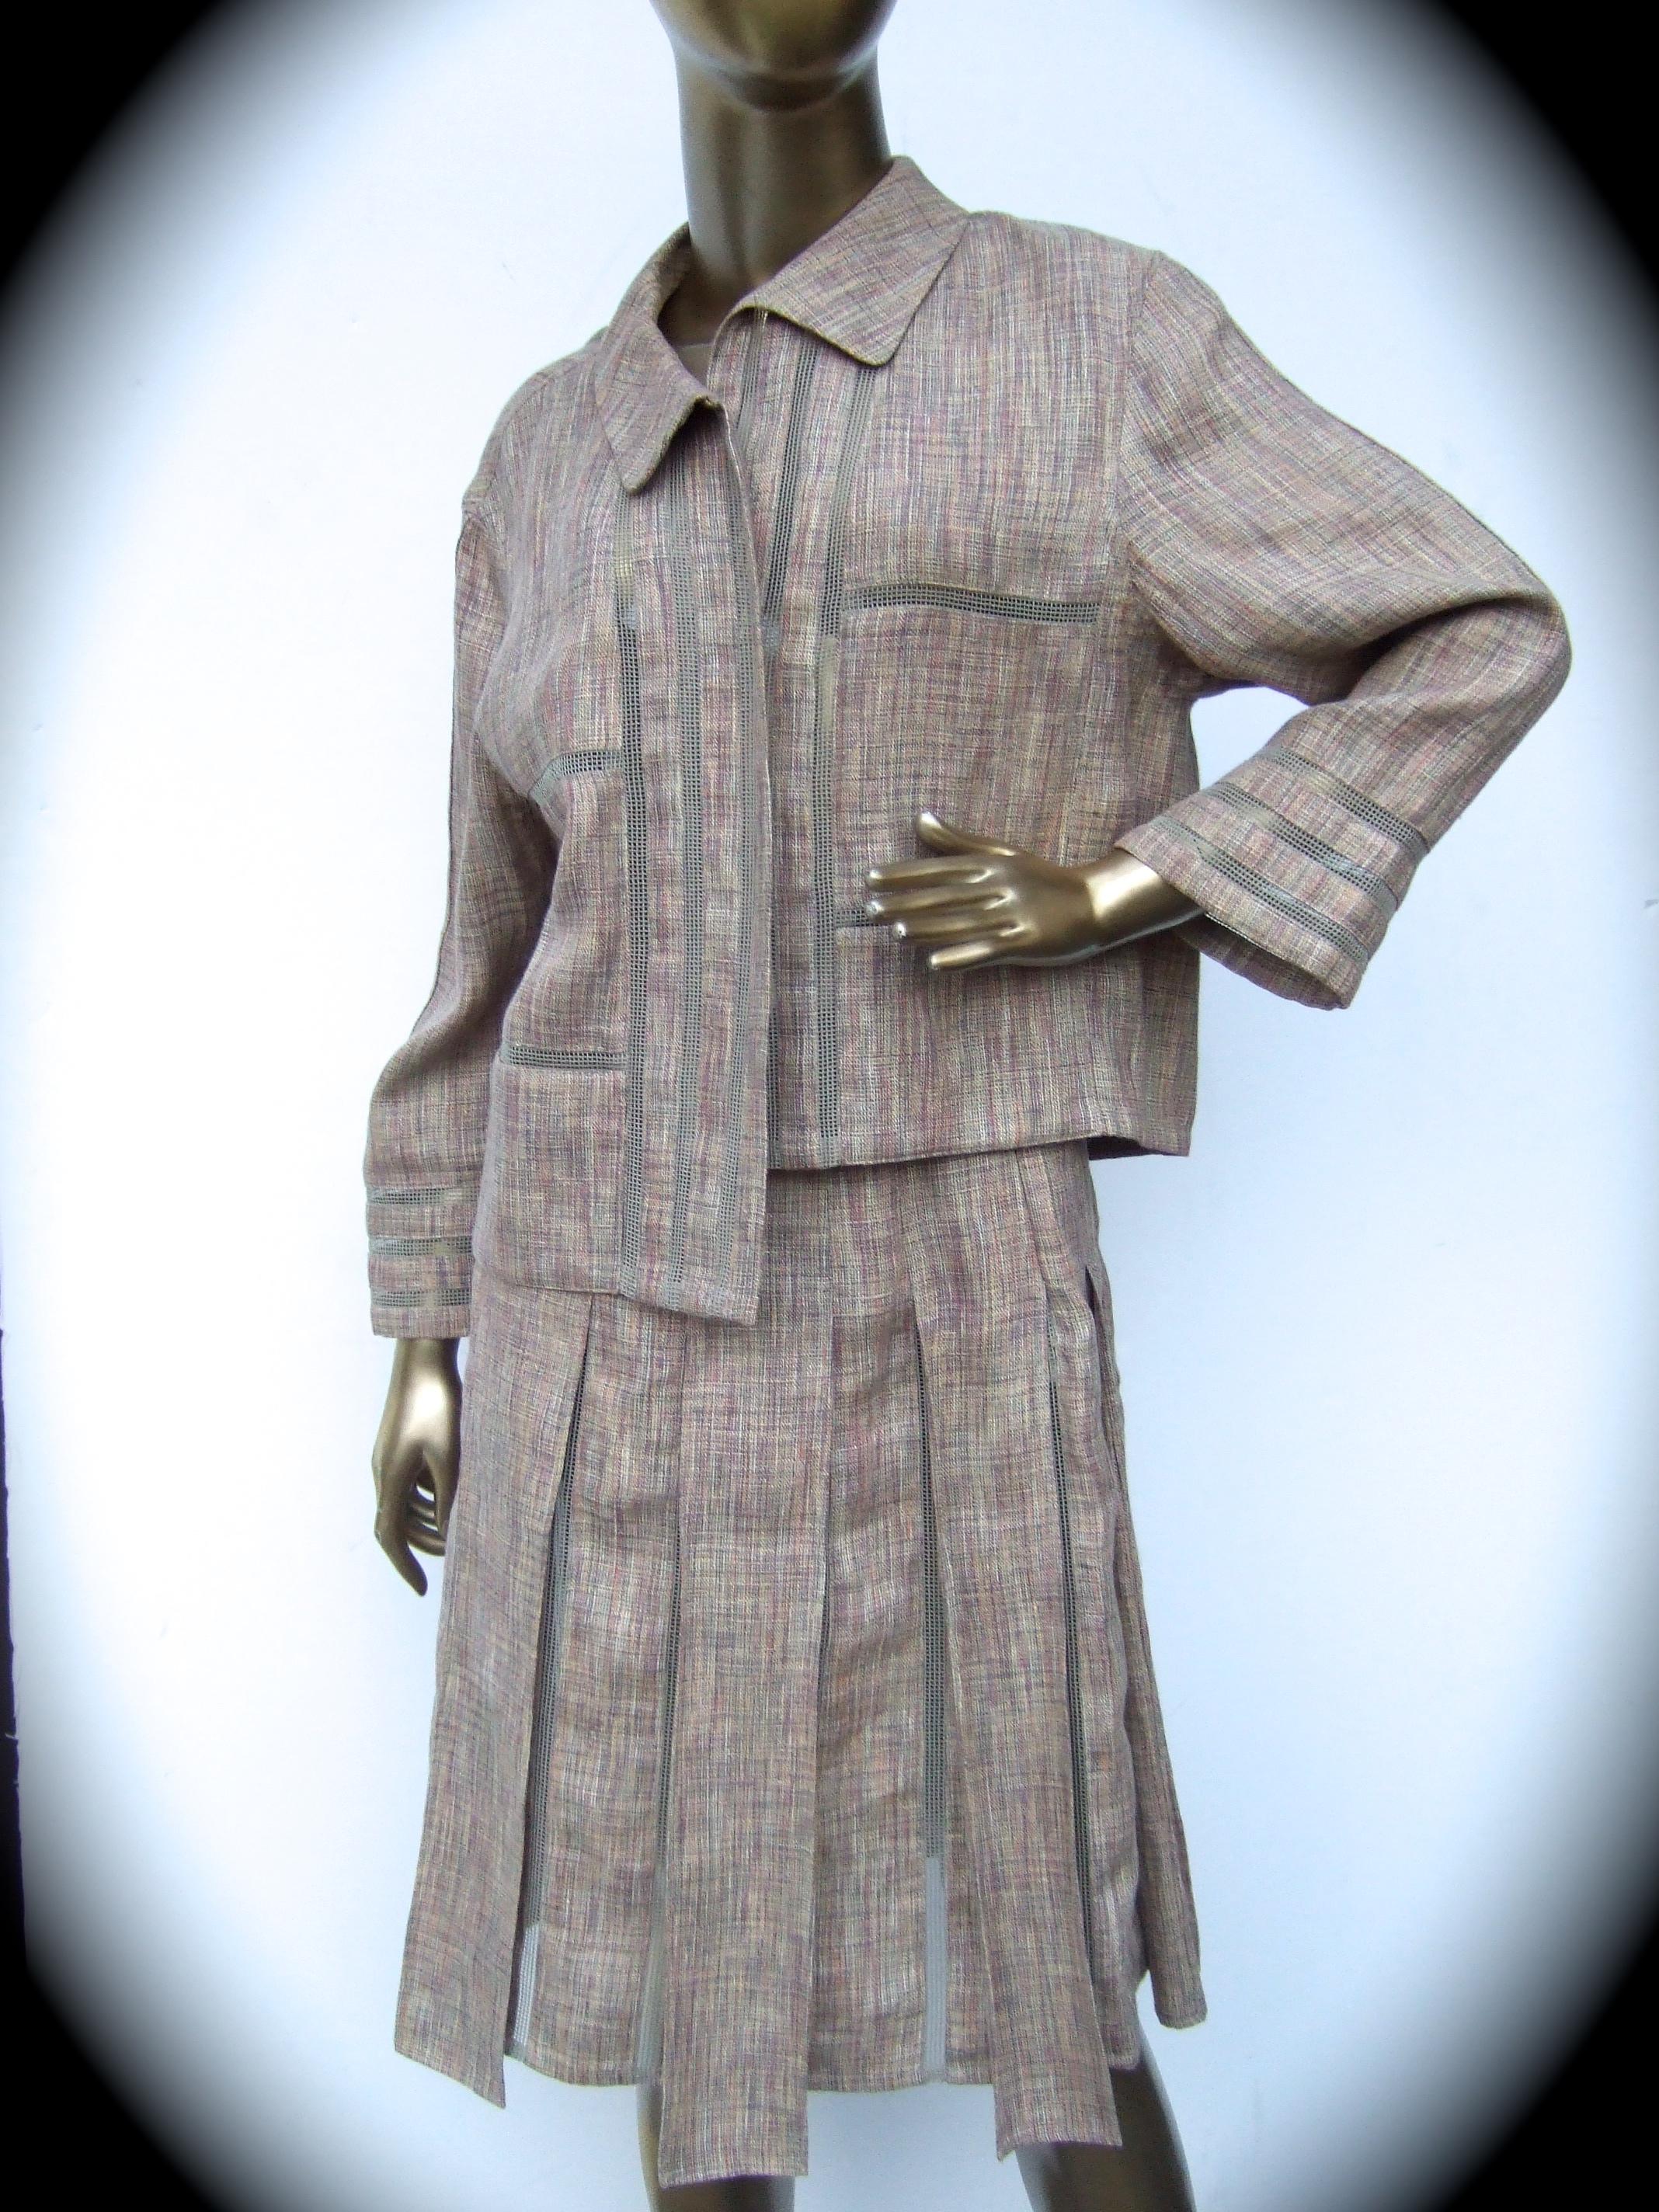 Chanel Chic beige linen & cotton blend skirt suit.  French Size 40
The stylish linen blend skirt suit is designed with a loose boxy jacket
Paired with a matching wide pleaded skirt

The jacket & skirt are designed with light weight linen & cotton